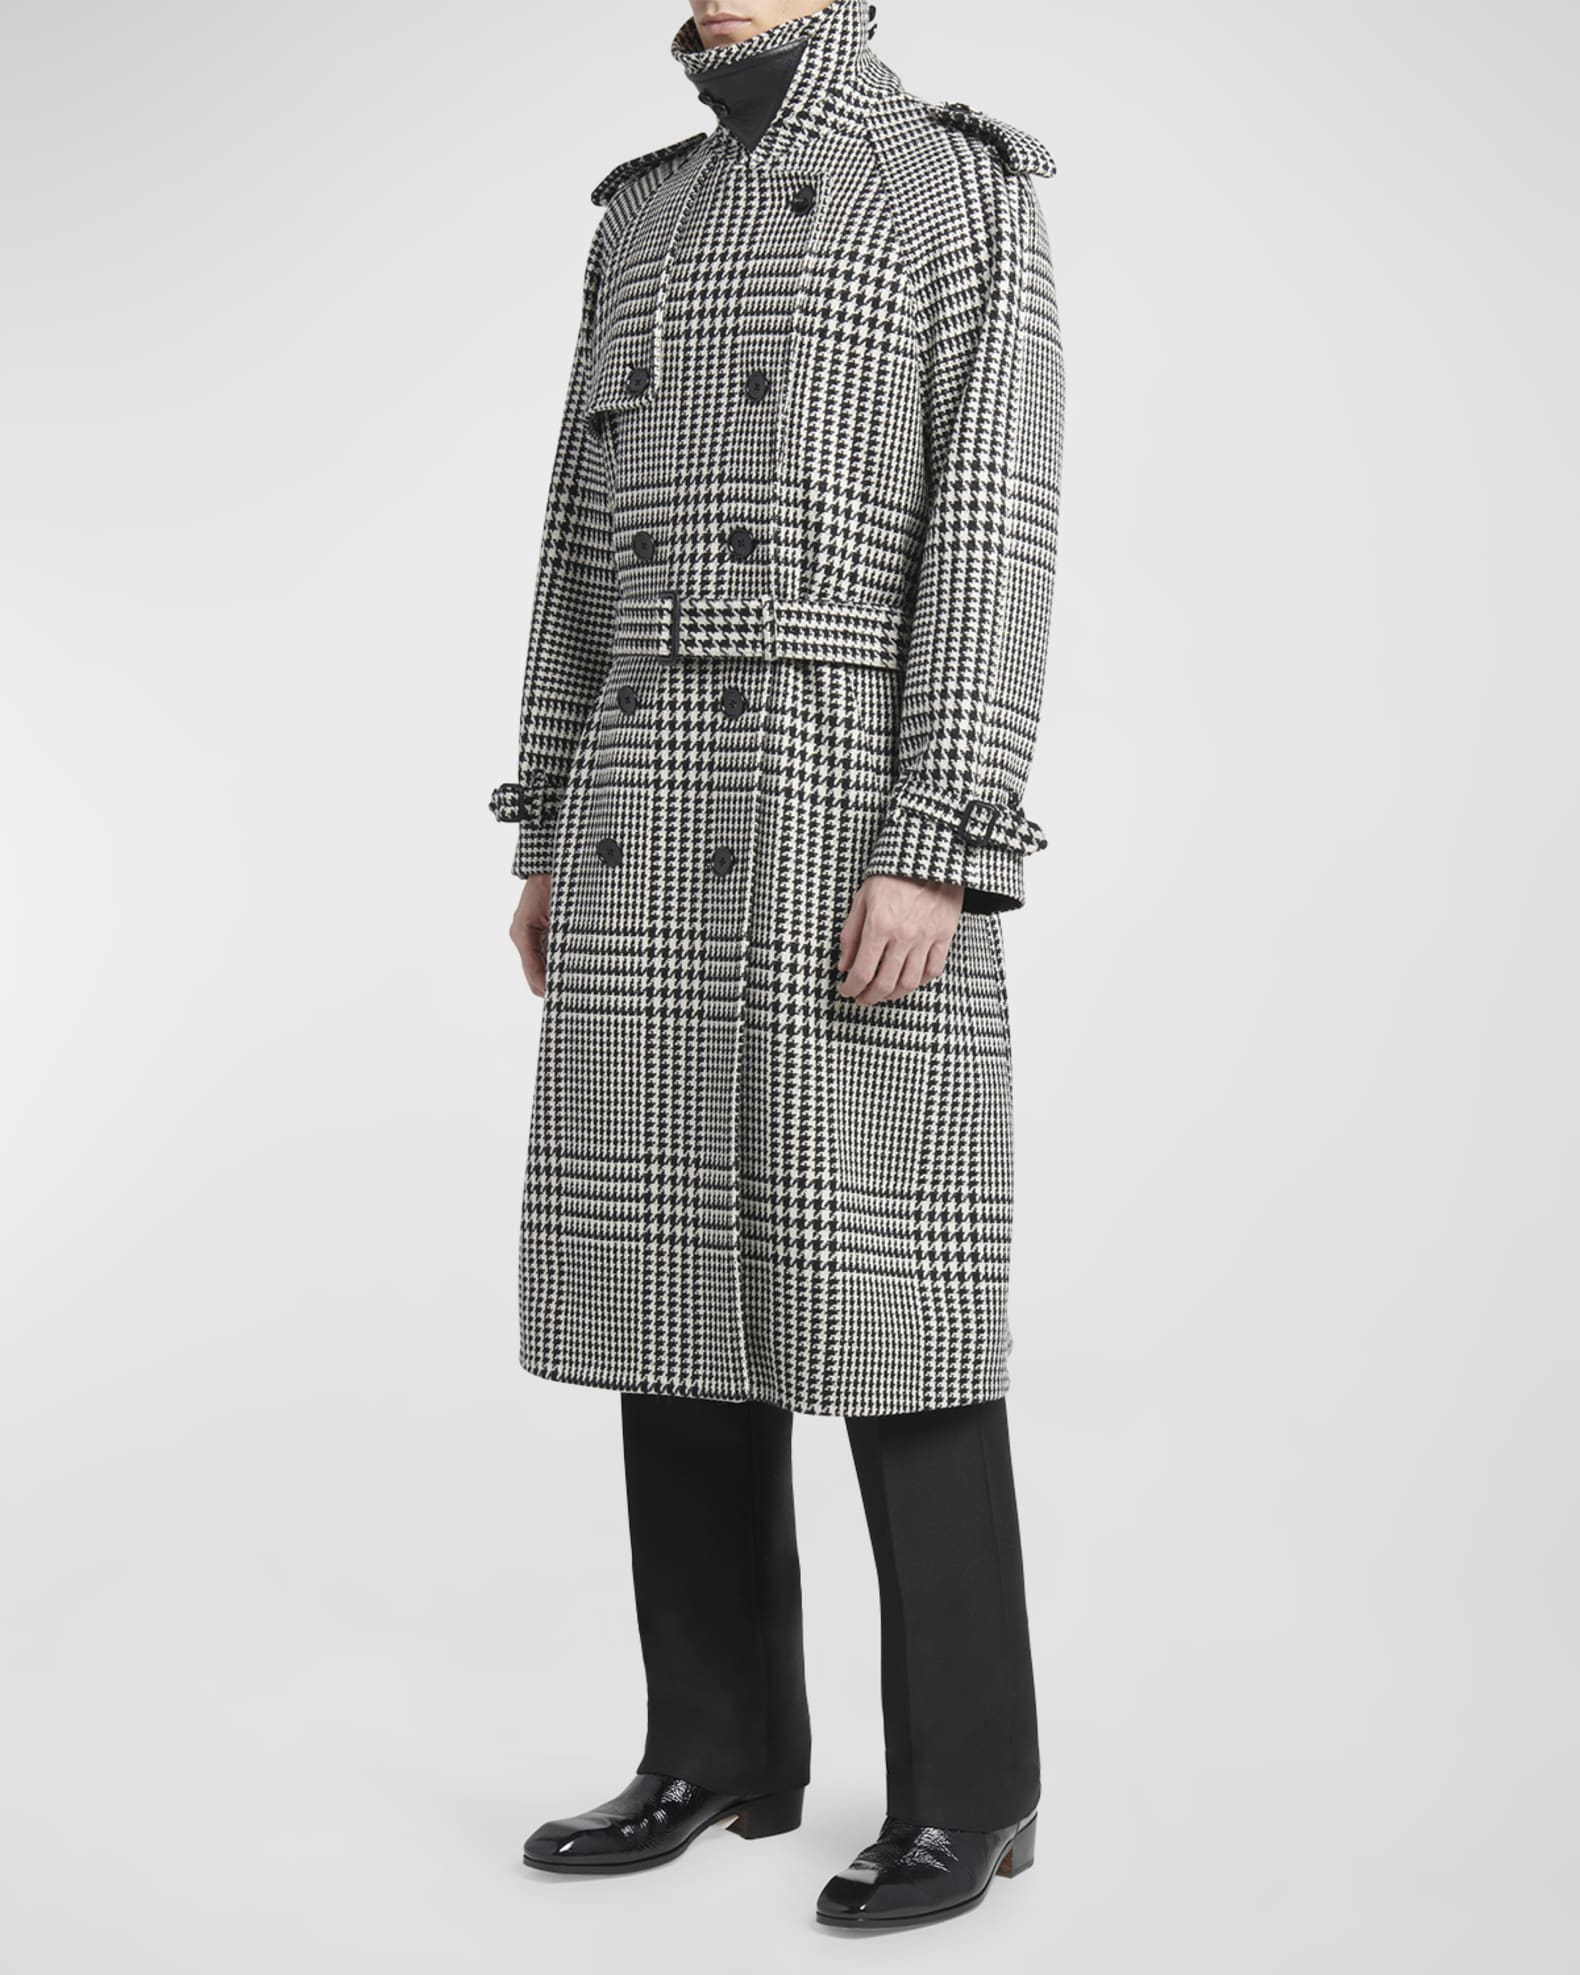 TOM FORD Men's Grand Prince of Wales Trench Coat | Neiman Marcus